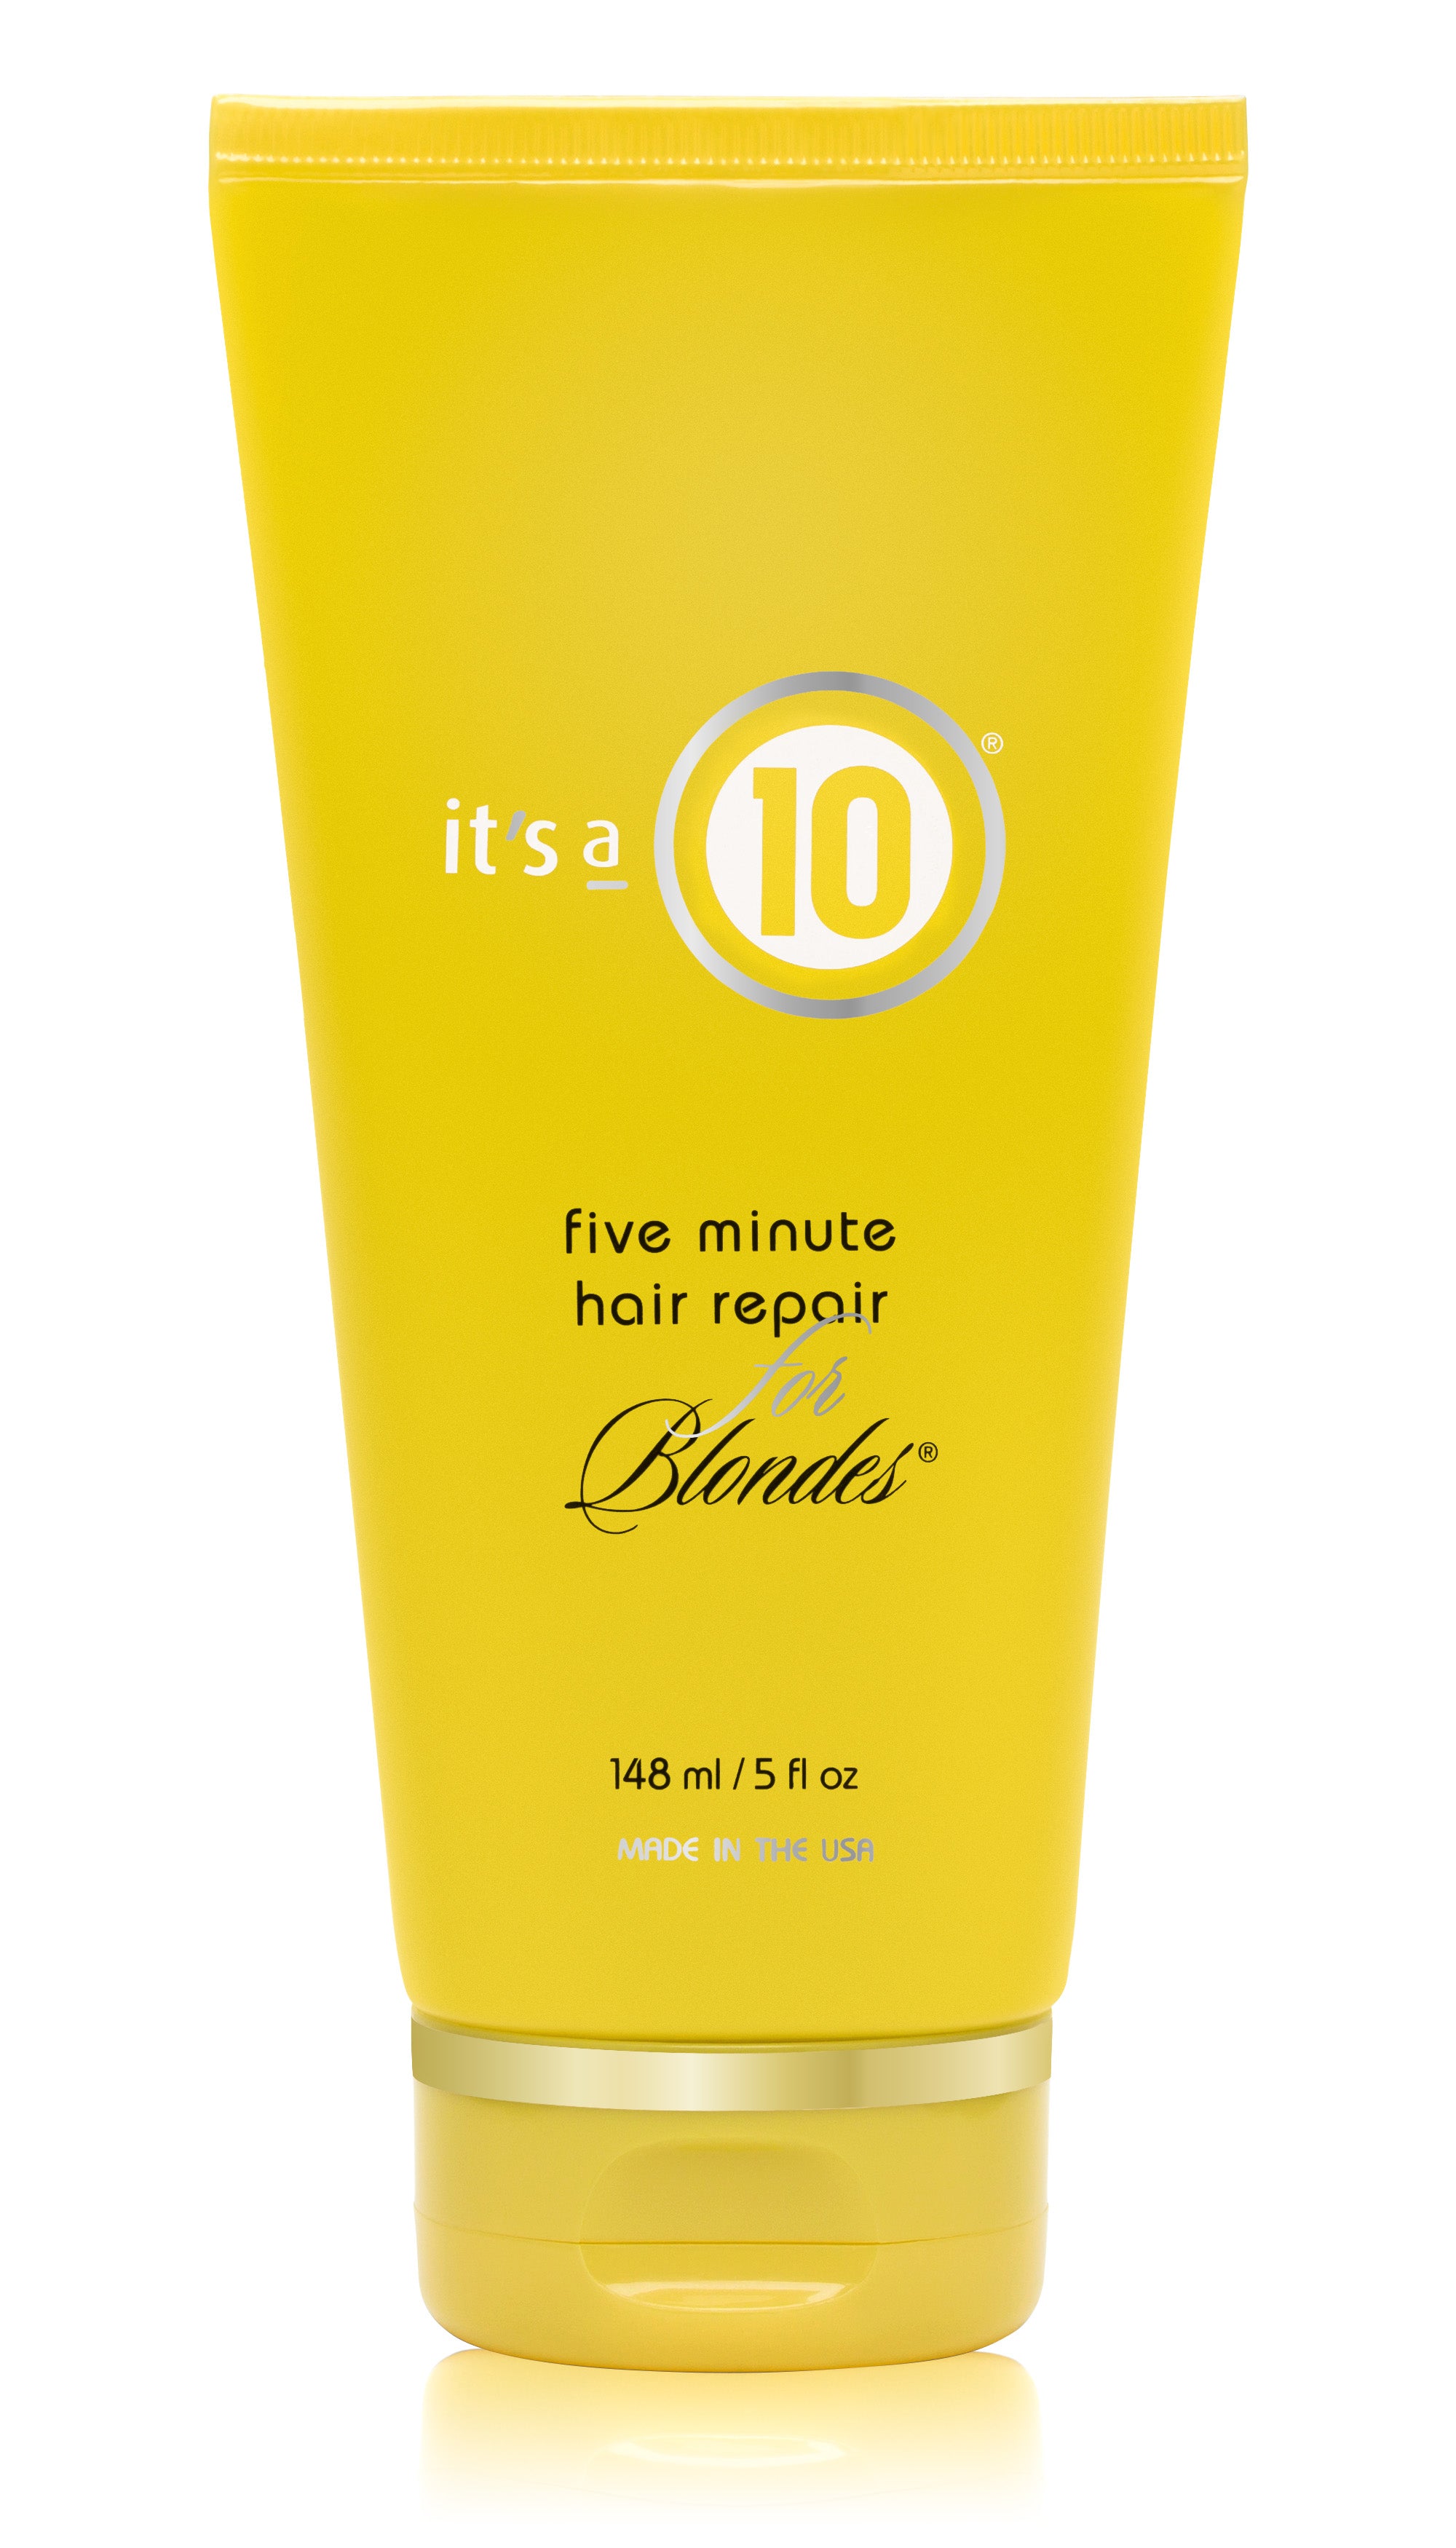 It's a 10 Miracle Five Minute Hair Repair For Blondes